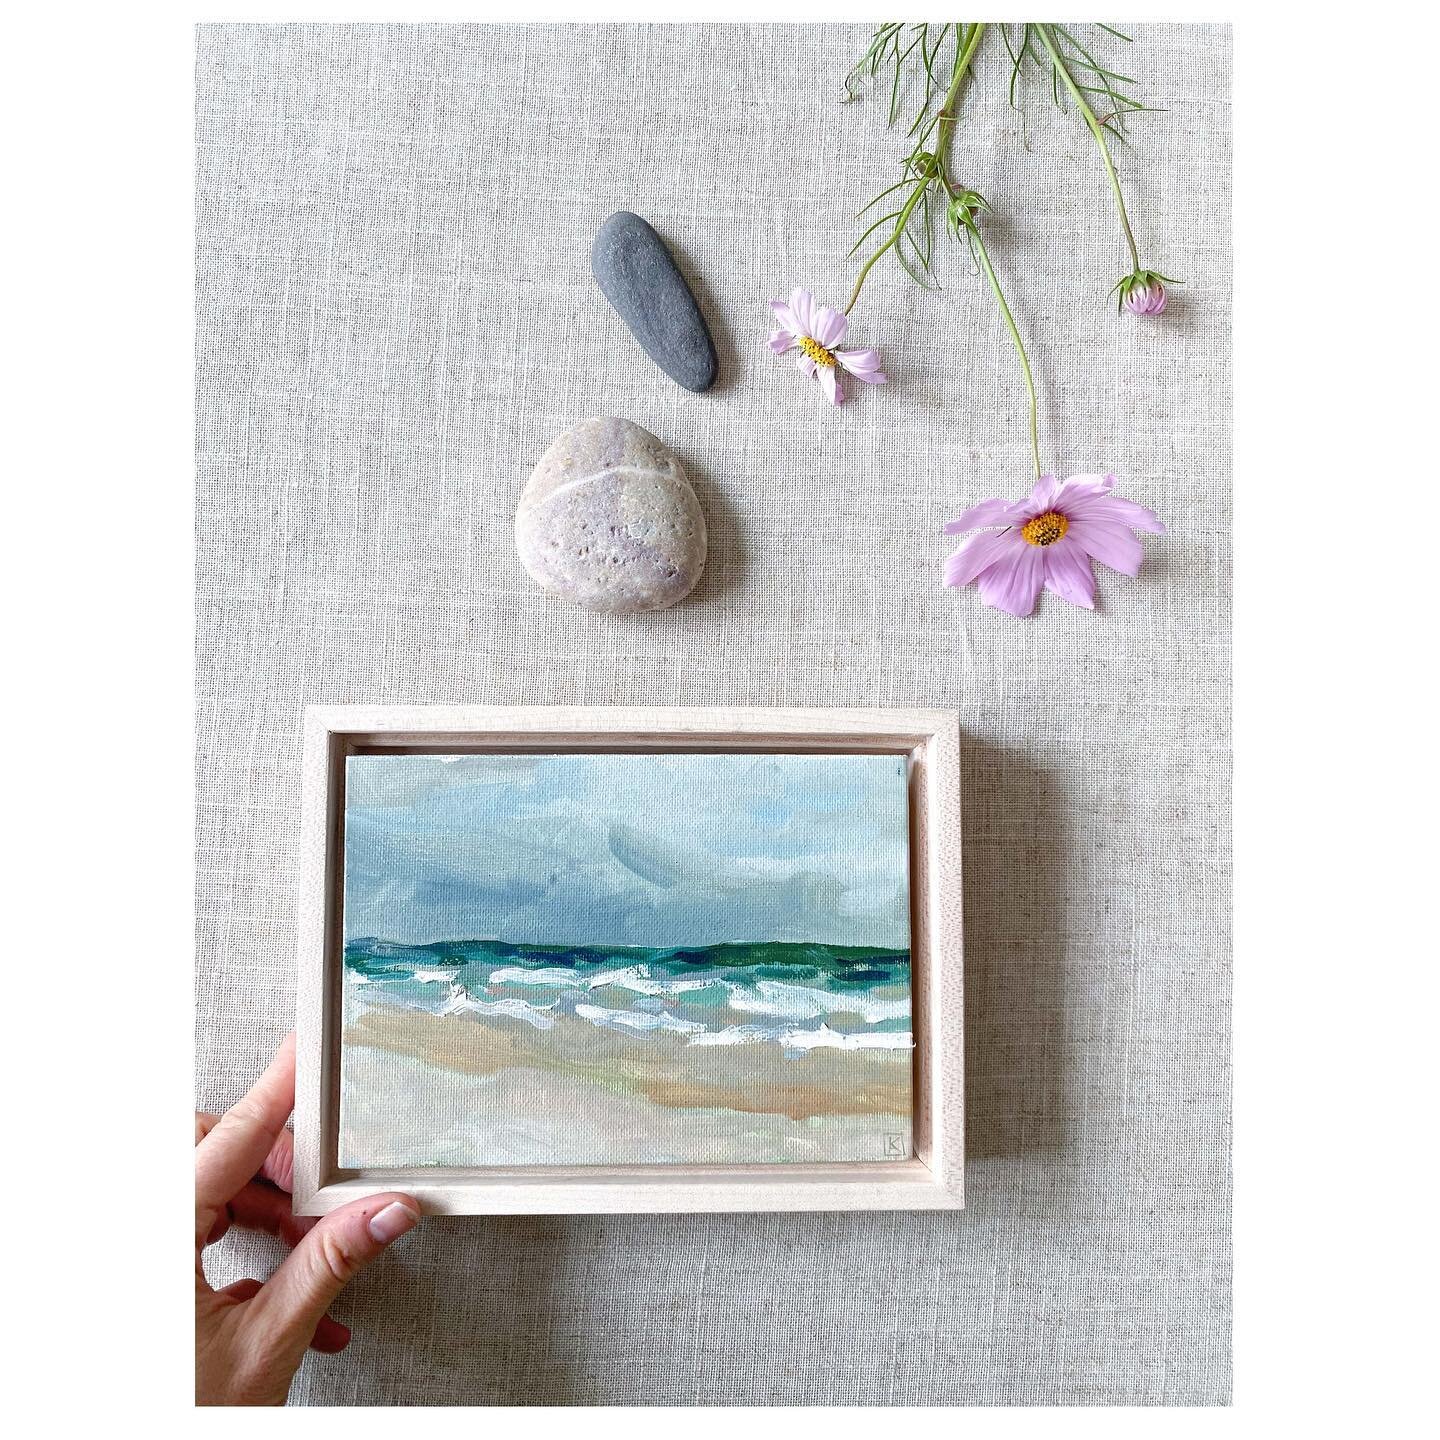 Hi friends, it&rsquo;s been a while!
.
In early October, I went to Block Island for a weekend of painting and came home with a trunk-full of beauty. Since then, I&rsquo;ve wanted to share my work with you, but have been rolling with some very busy li